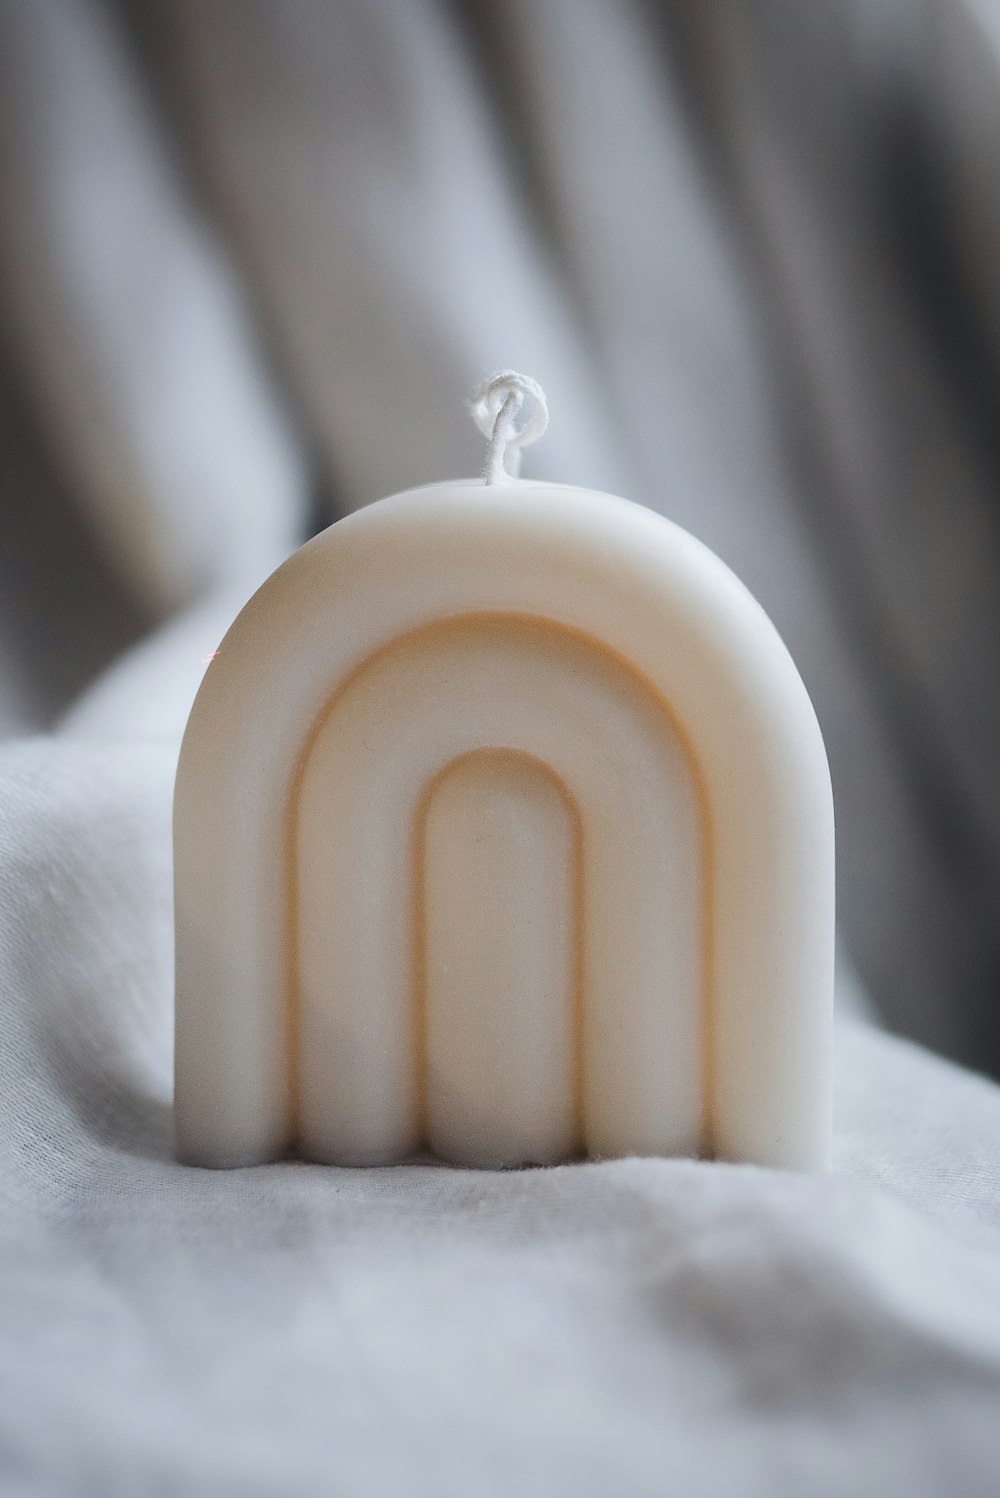 a close up of a soap bar with a ring on it